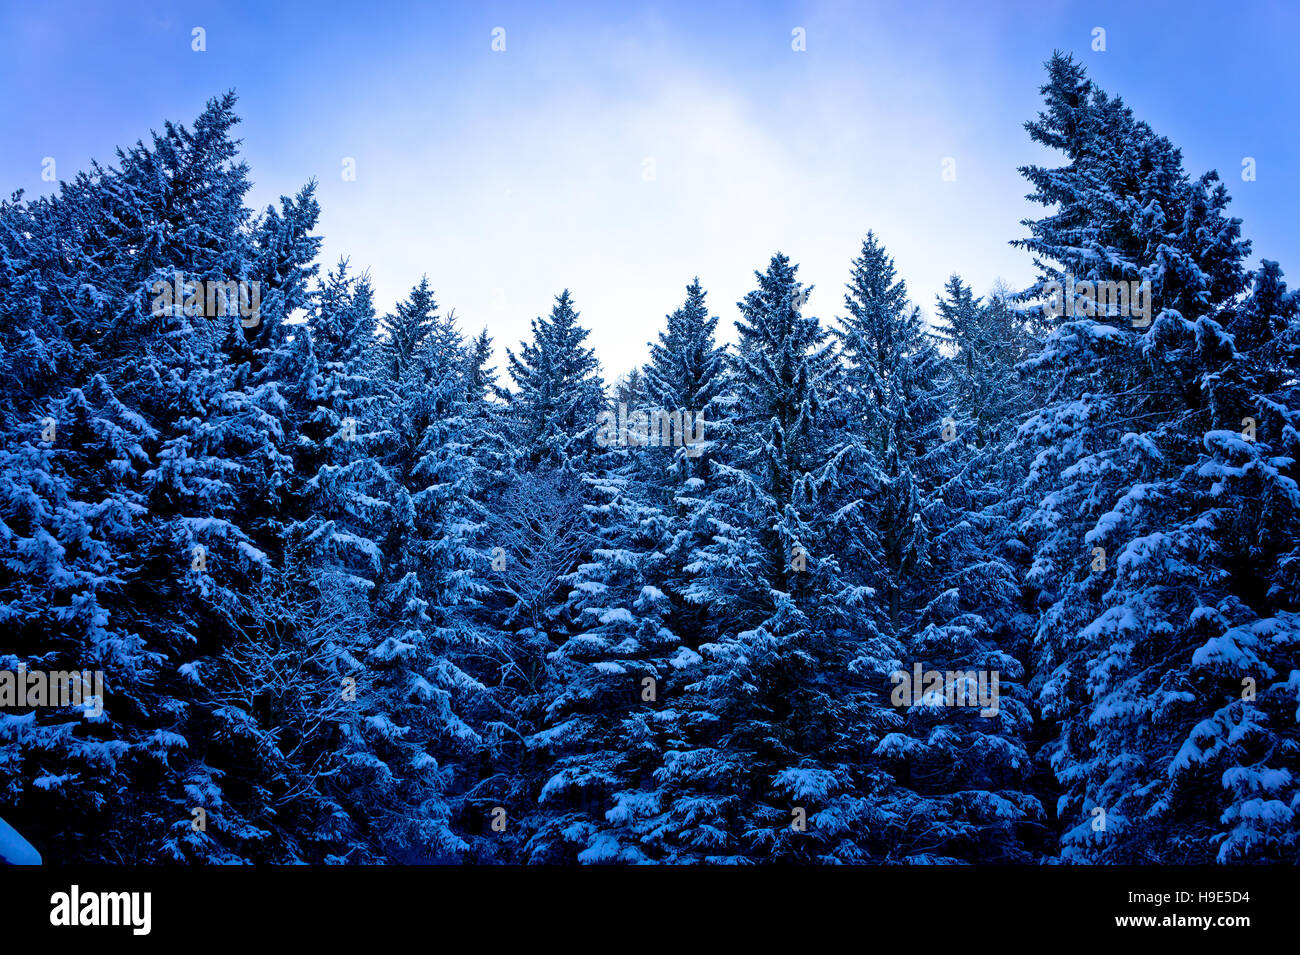 Alps pine tree forest in snow view Stock Photo